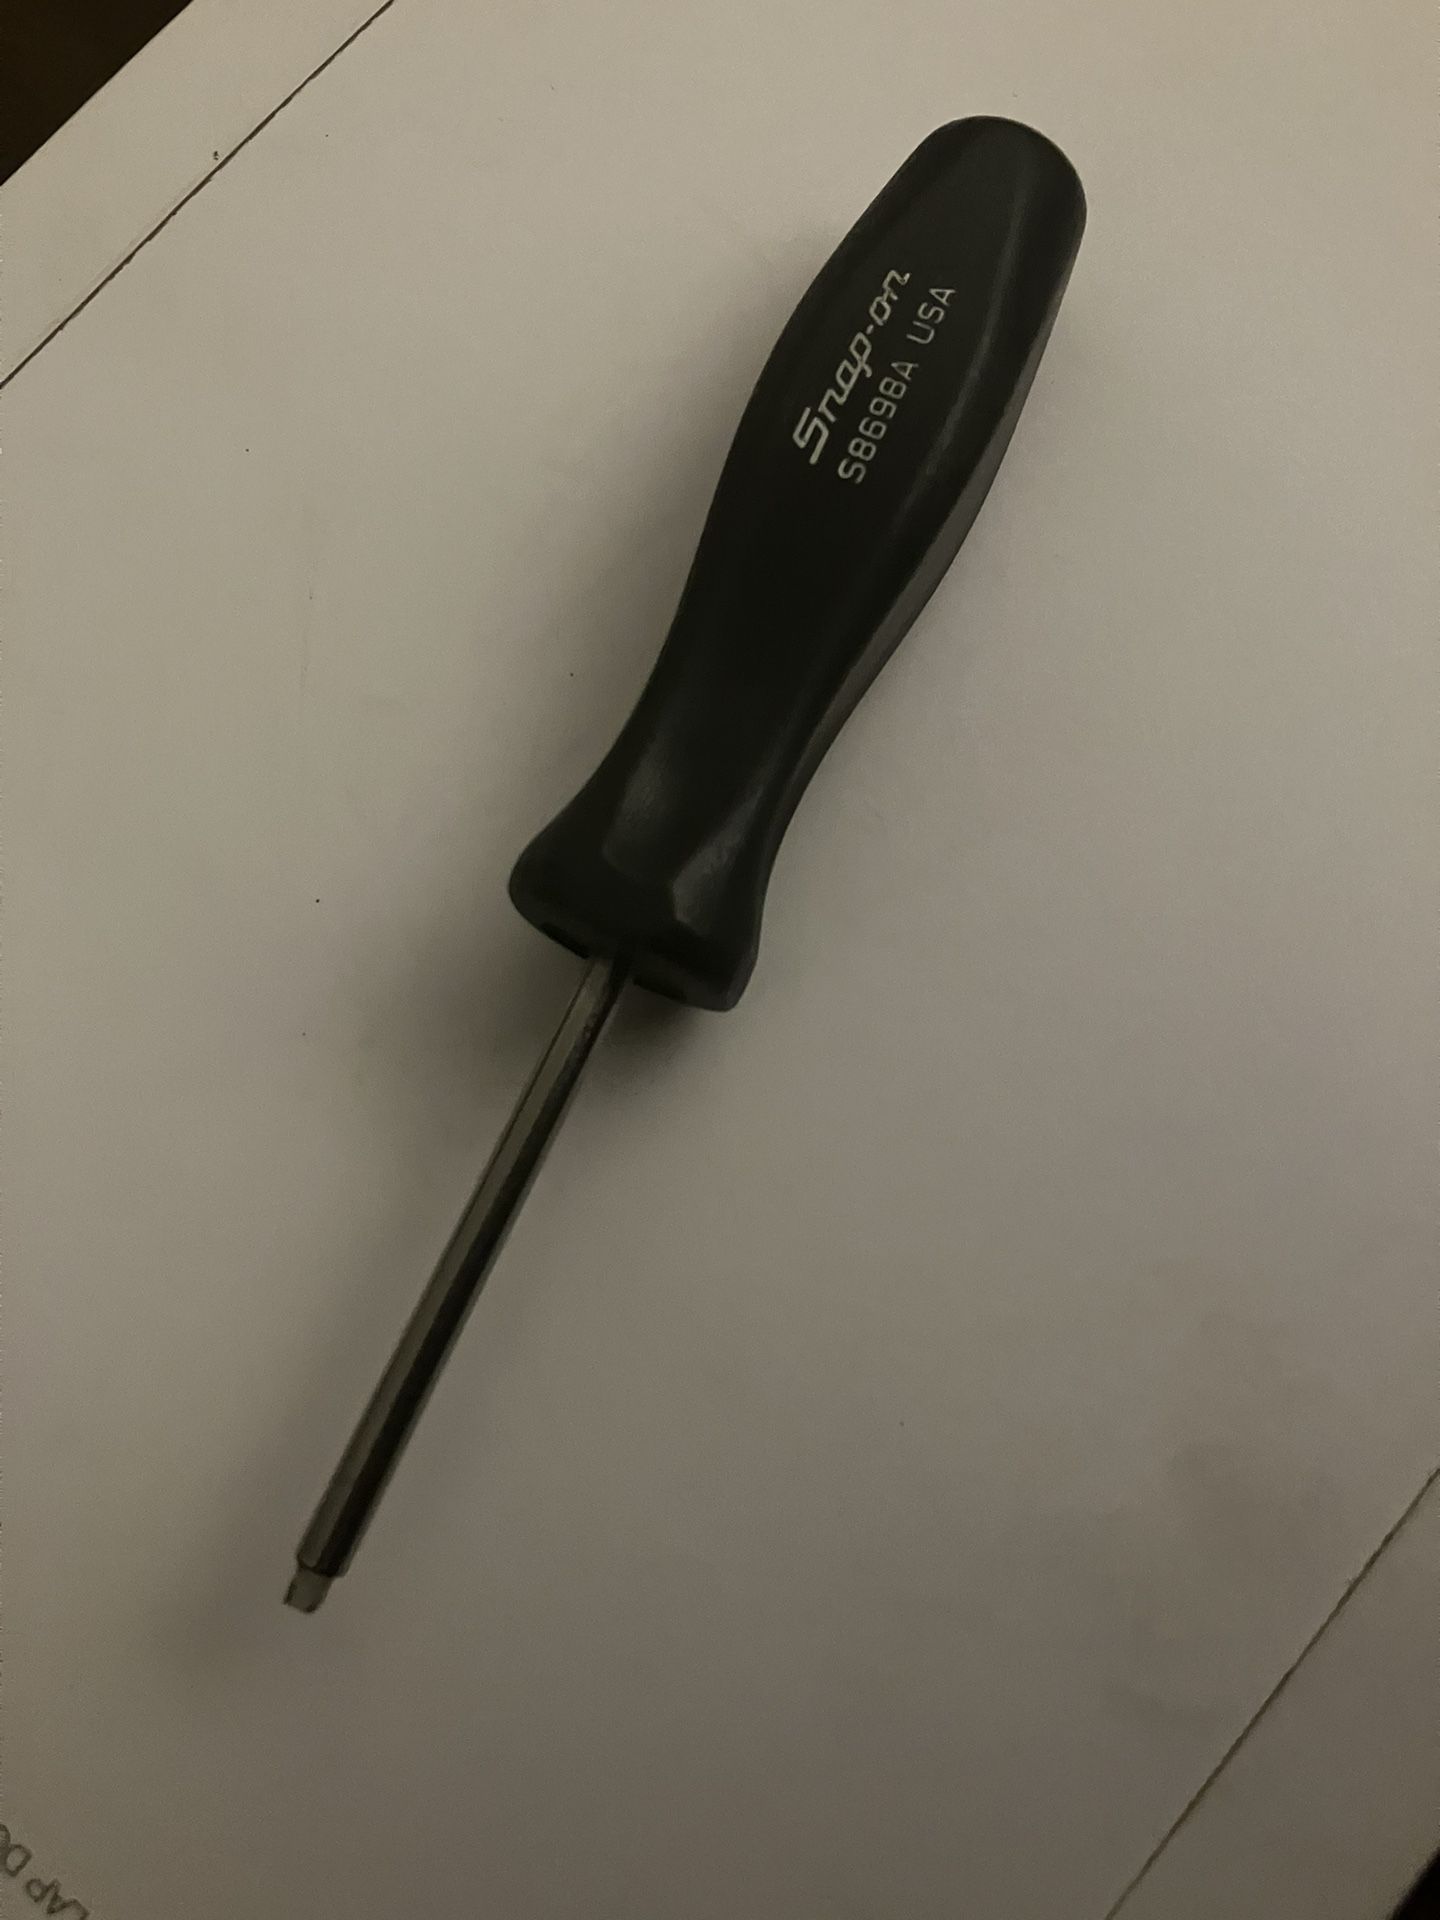 Snap-on Square Driver Model No. S8698A